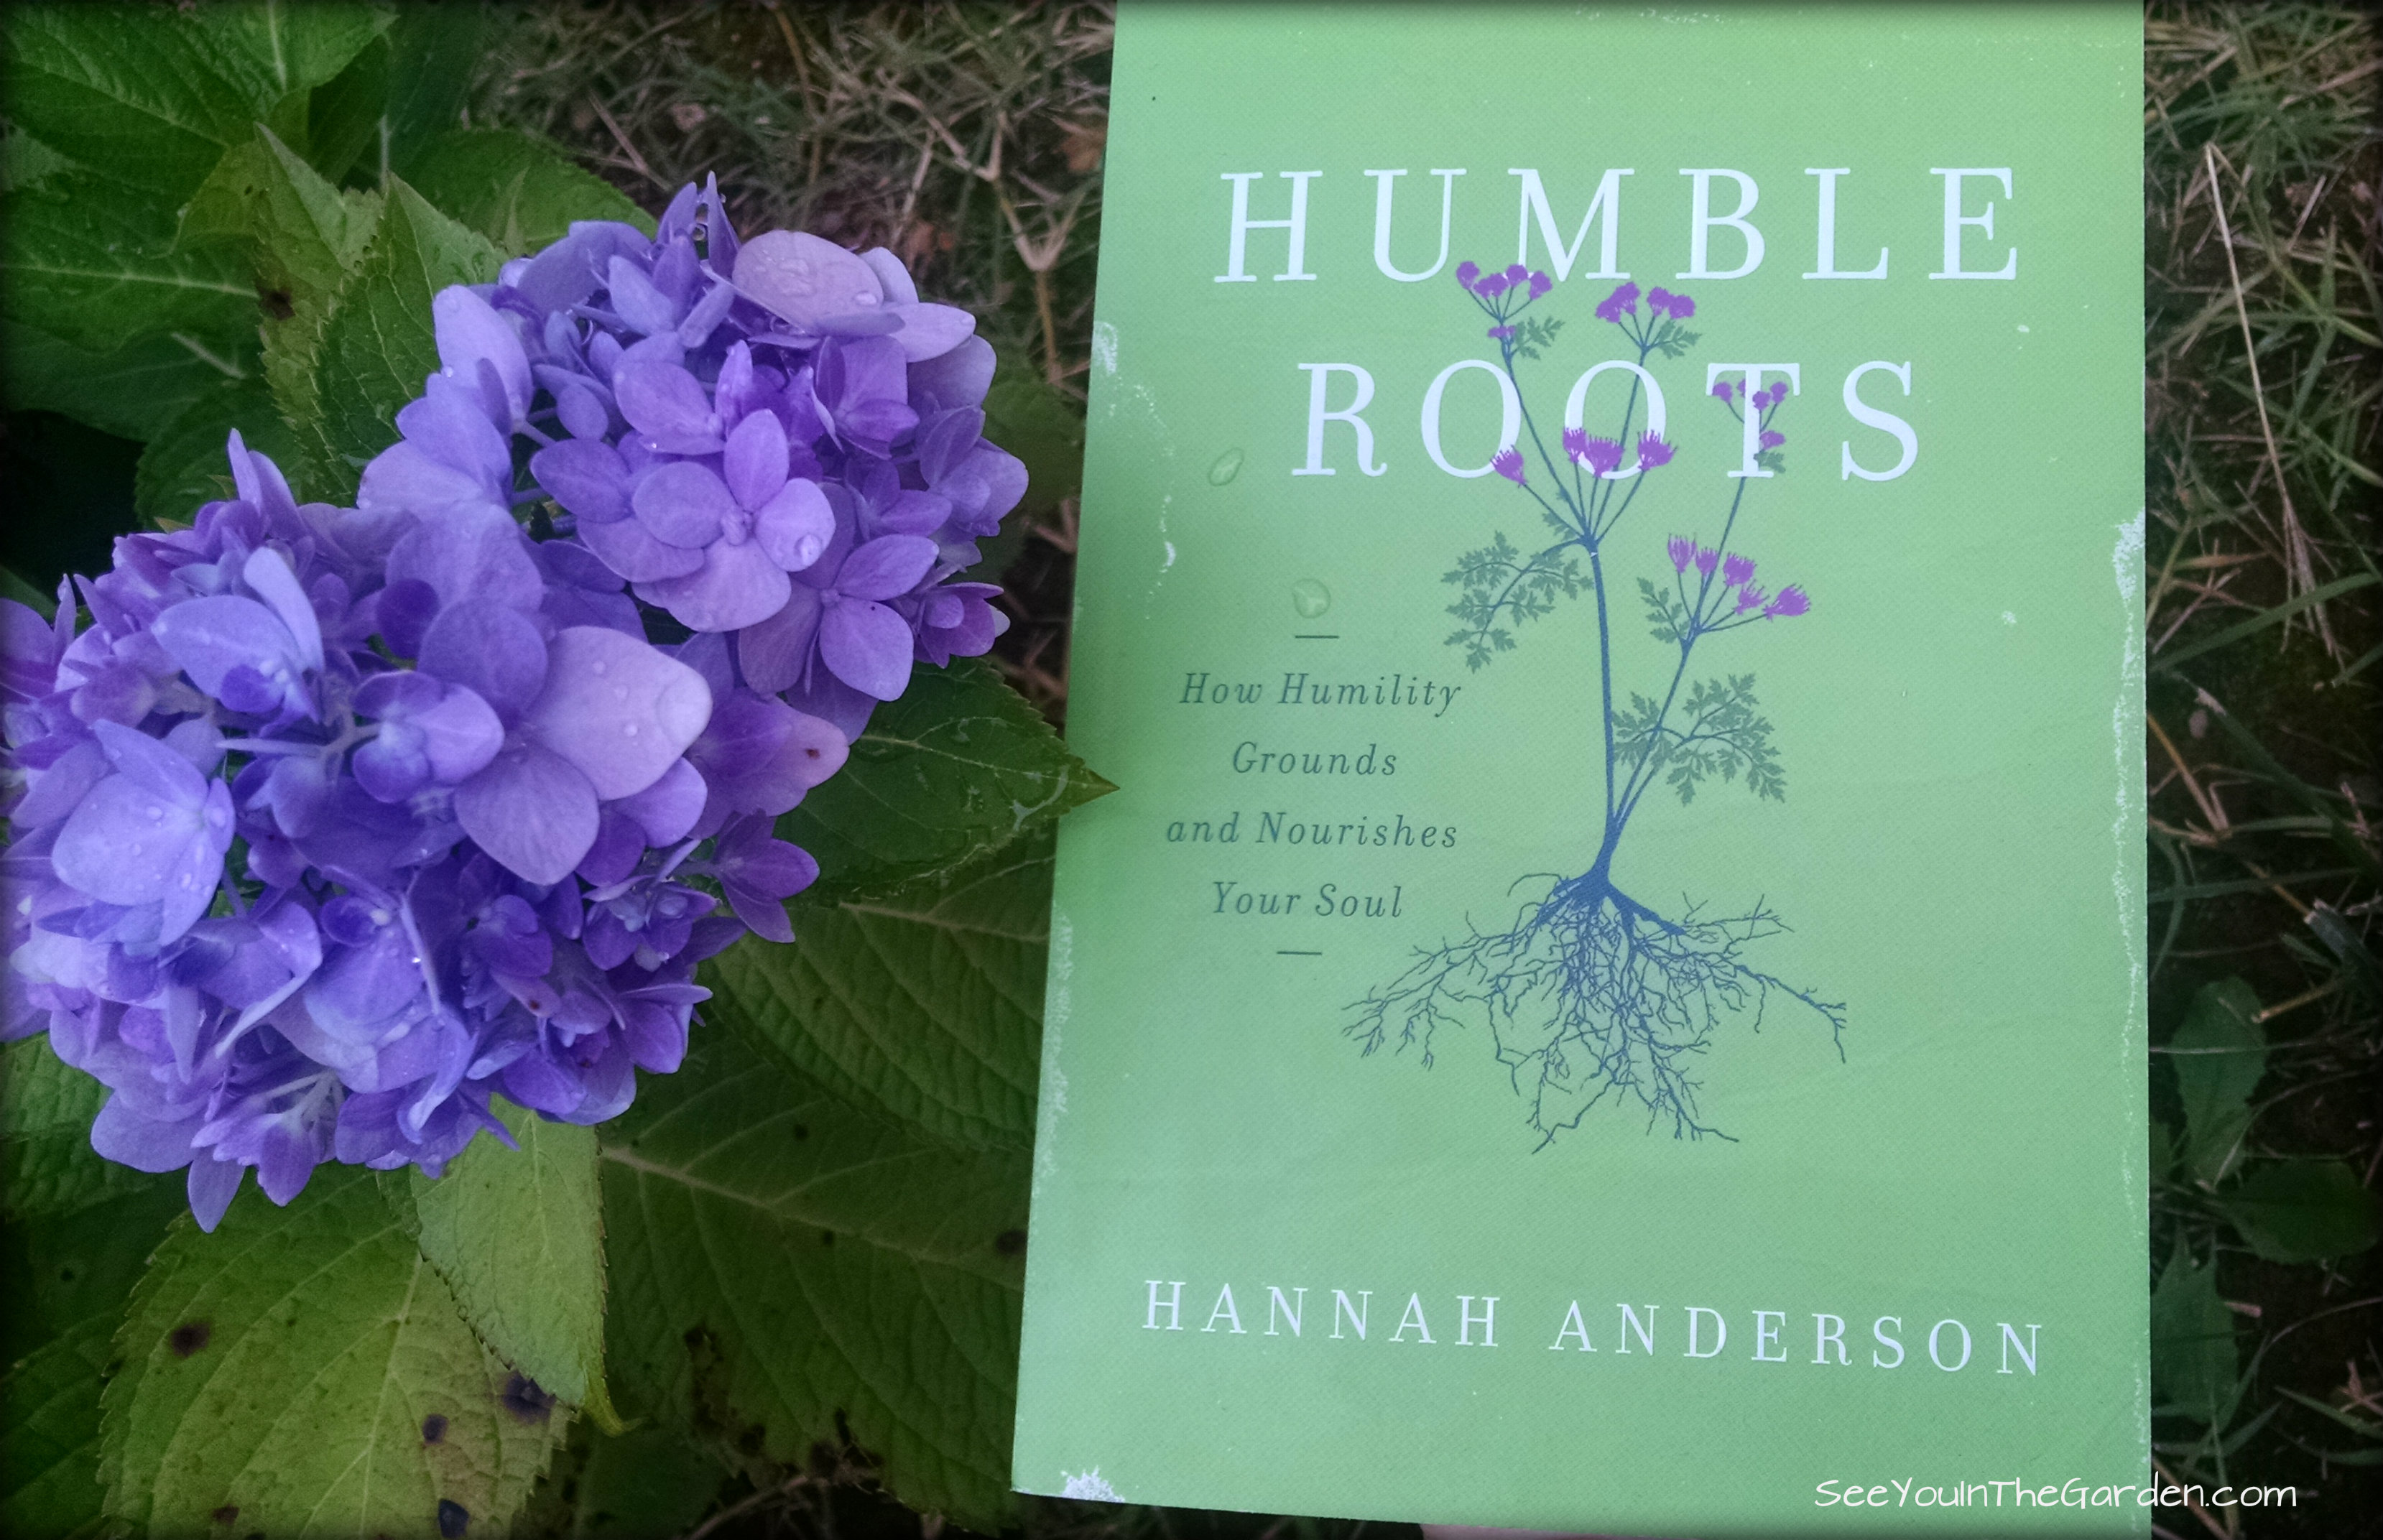 Humble-Roots image